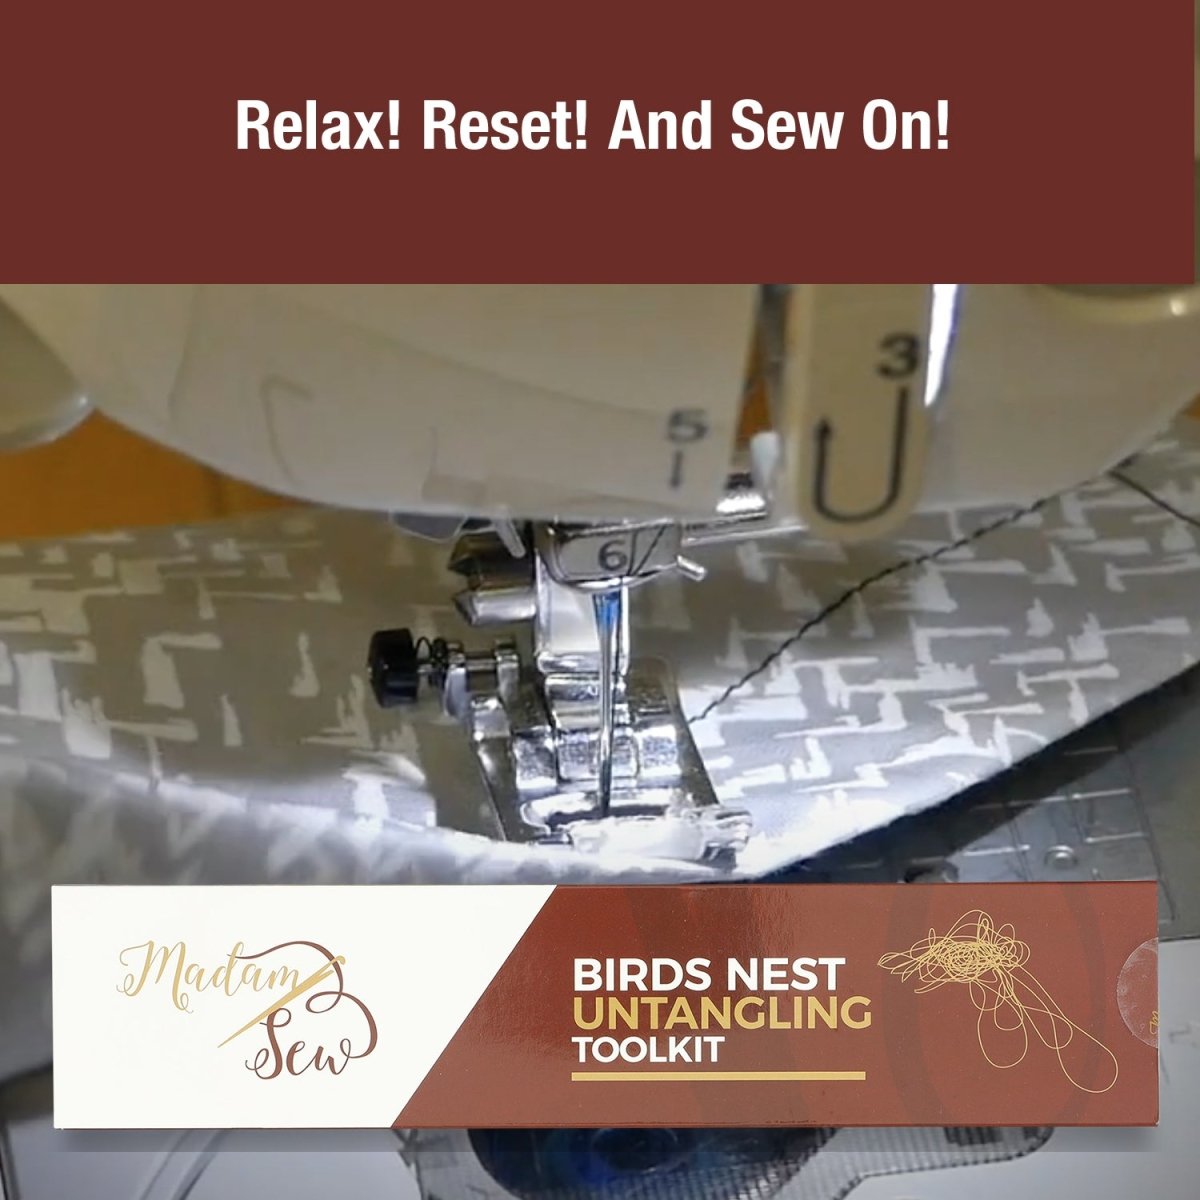 The bird nest toolkit helps you to untangle thread bunching on your sewing machine